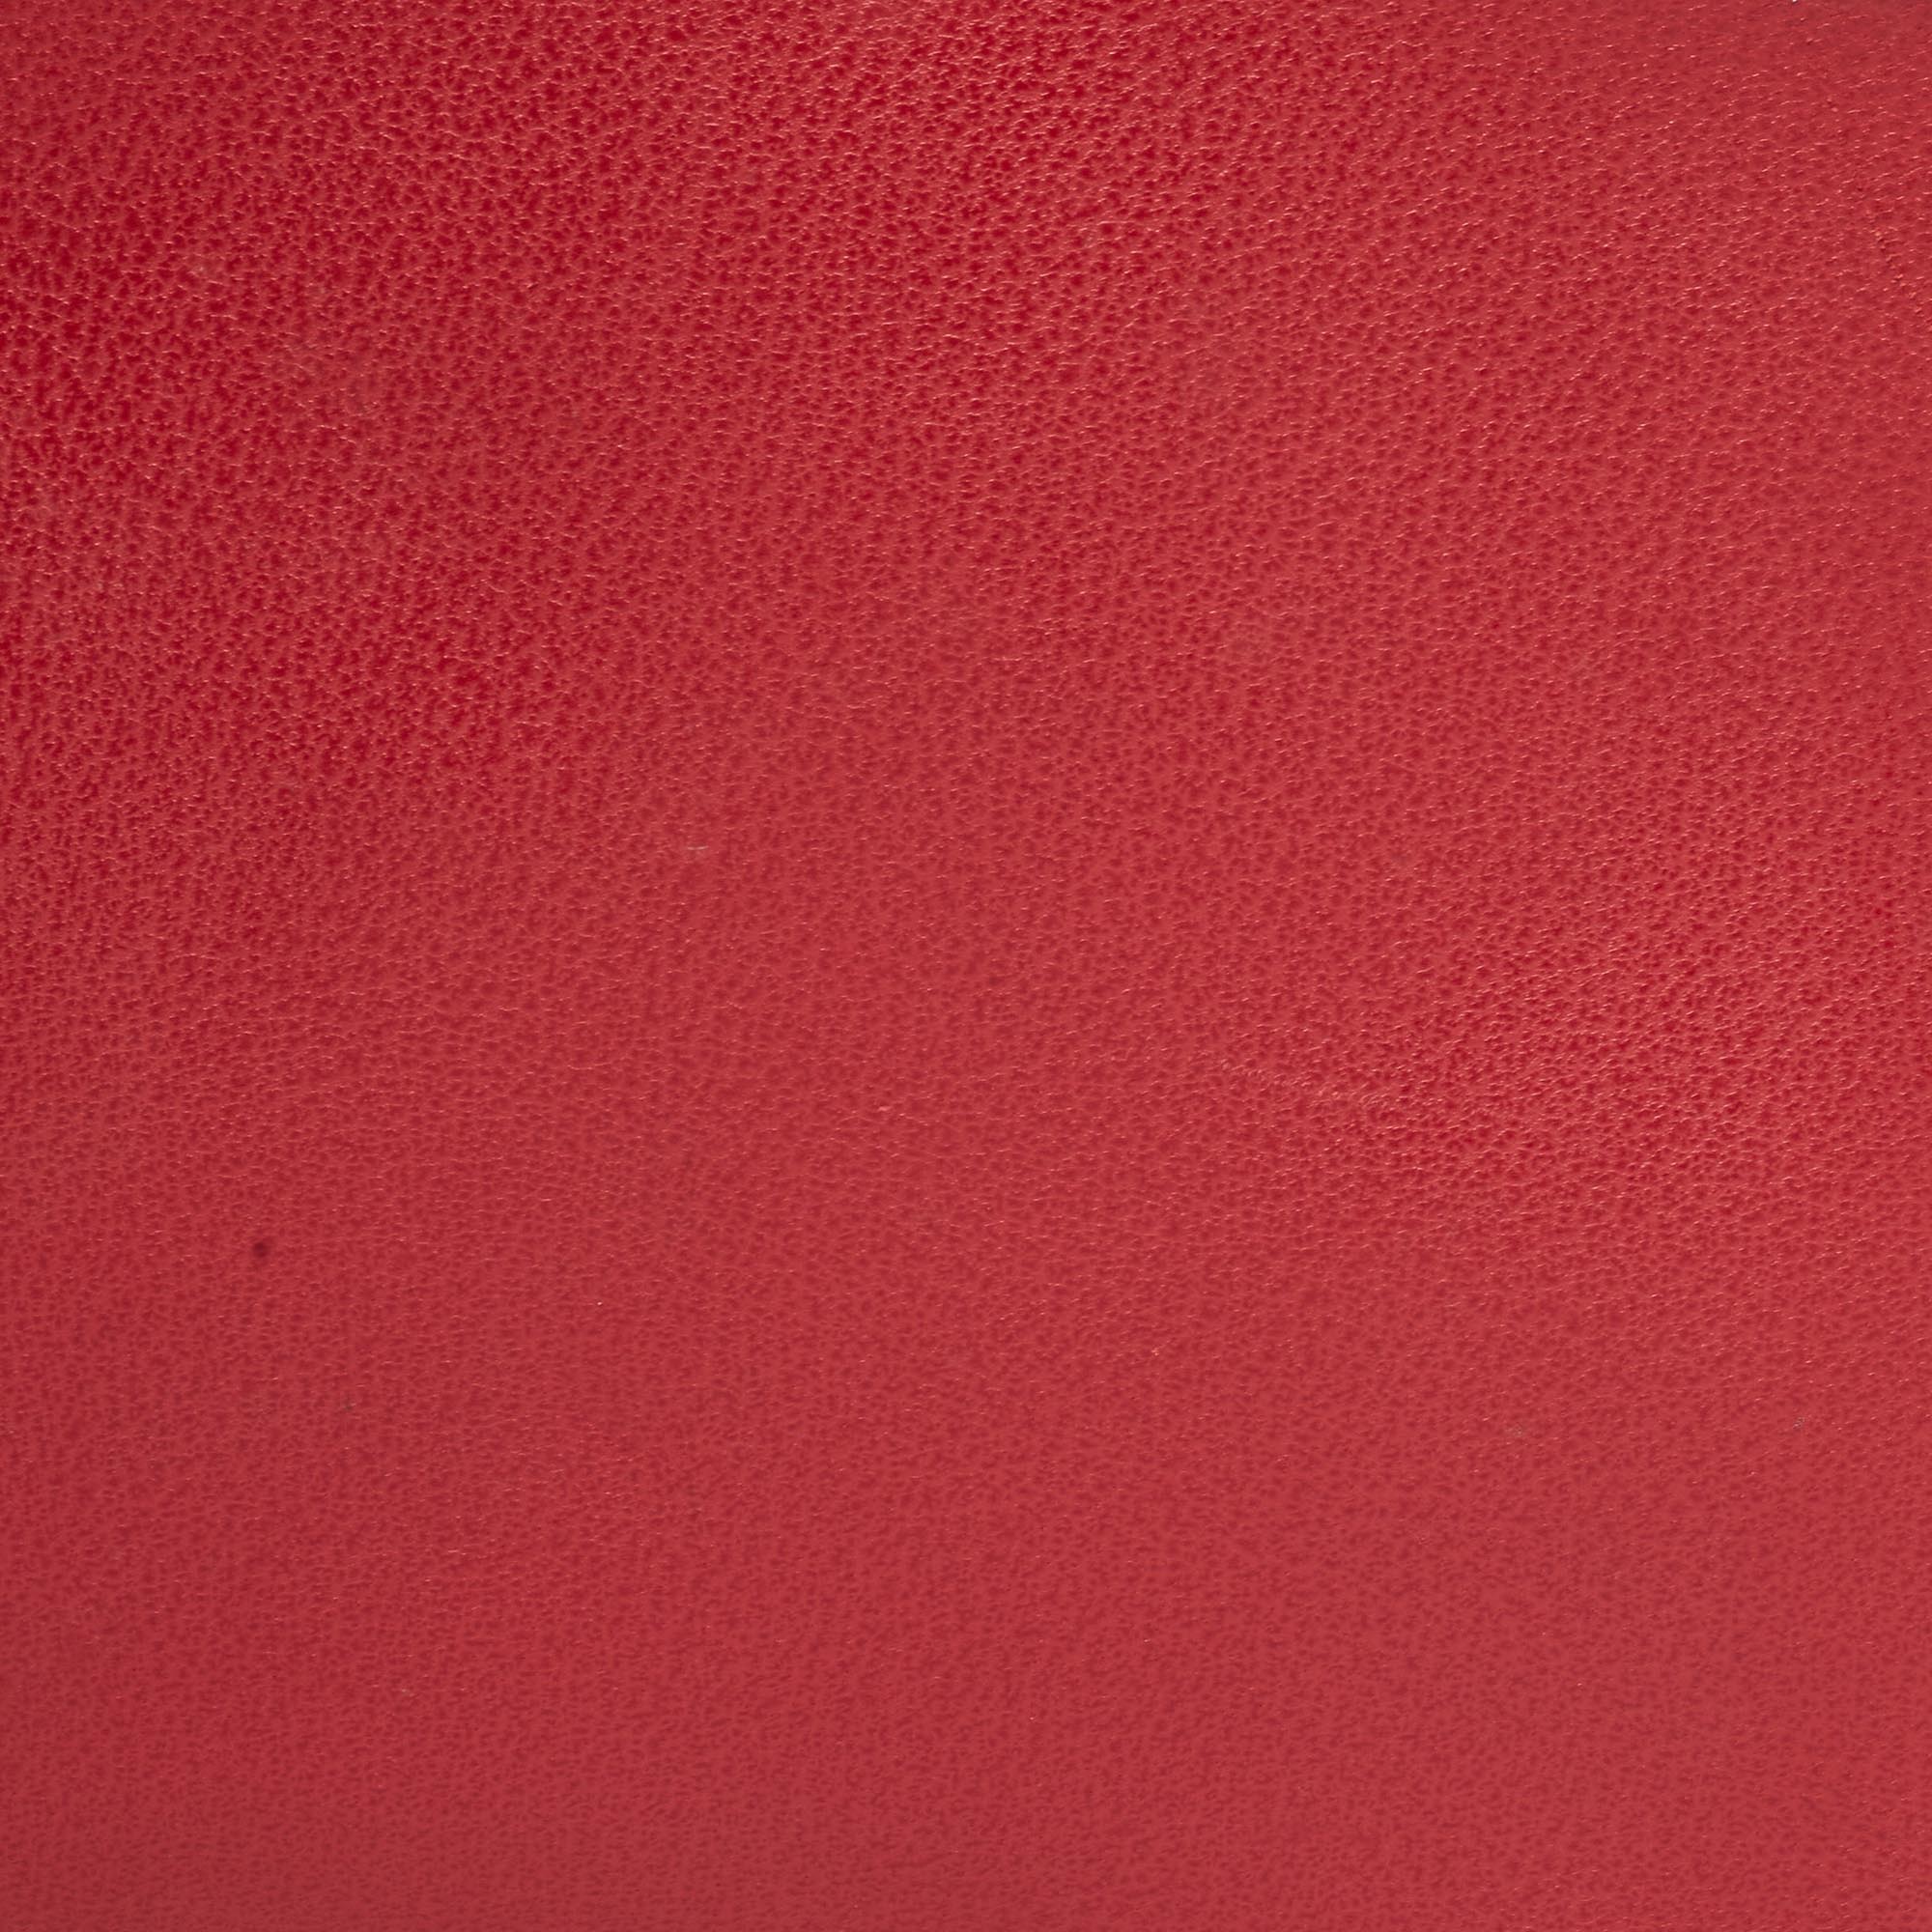 Gucci Red Leather Briefcase Bag